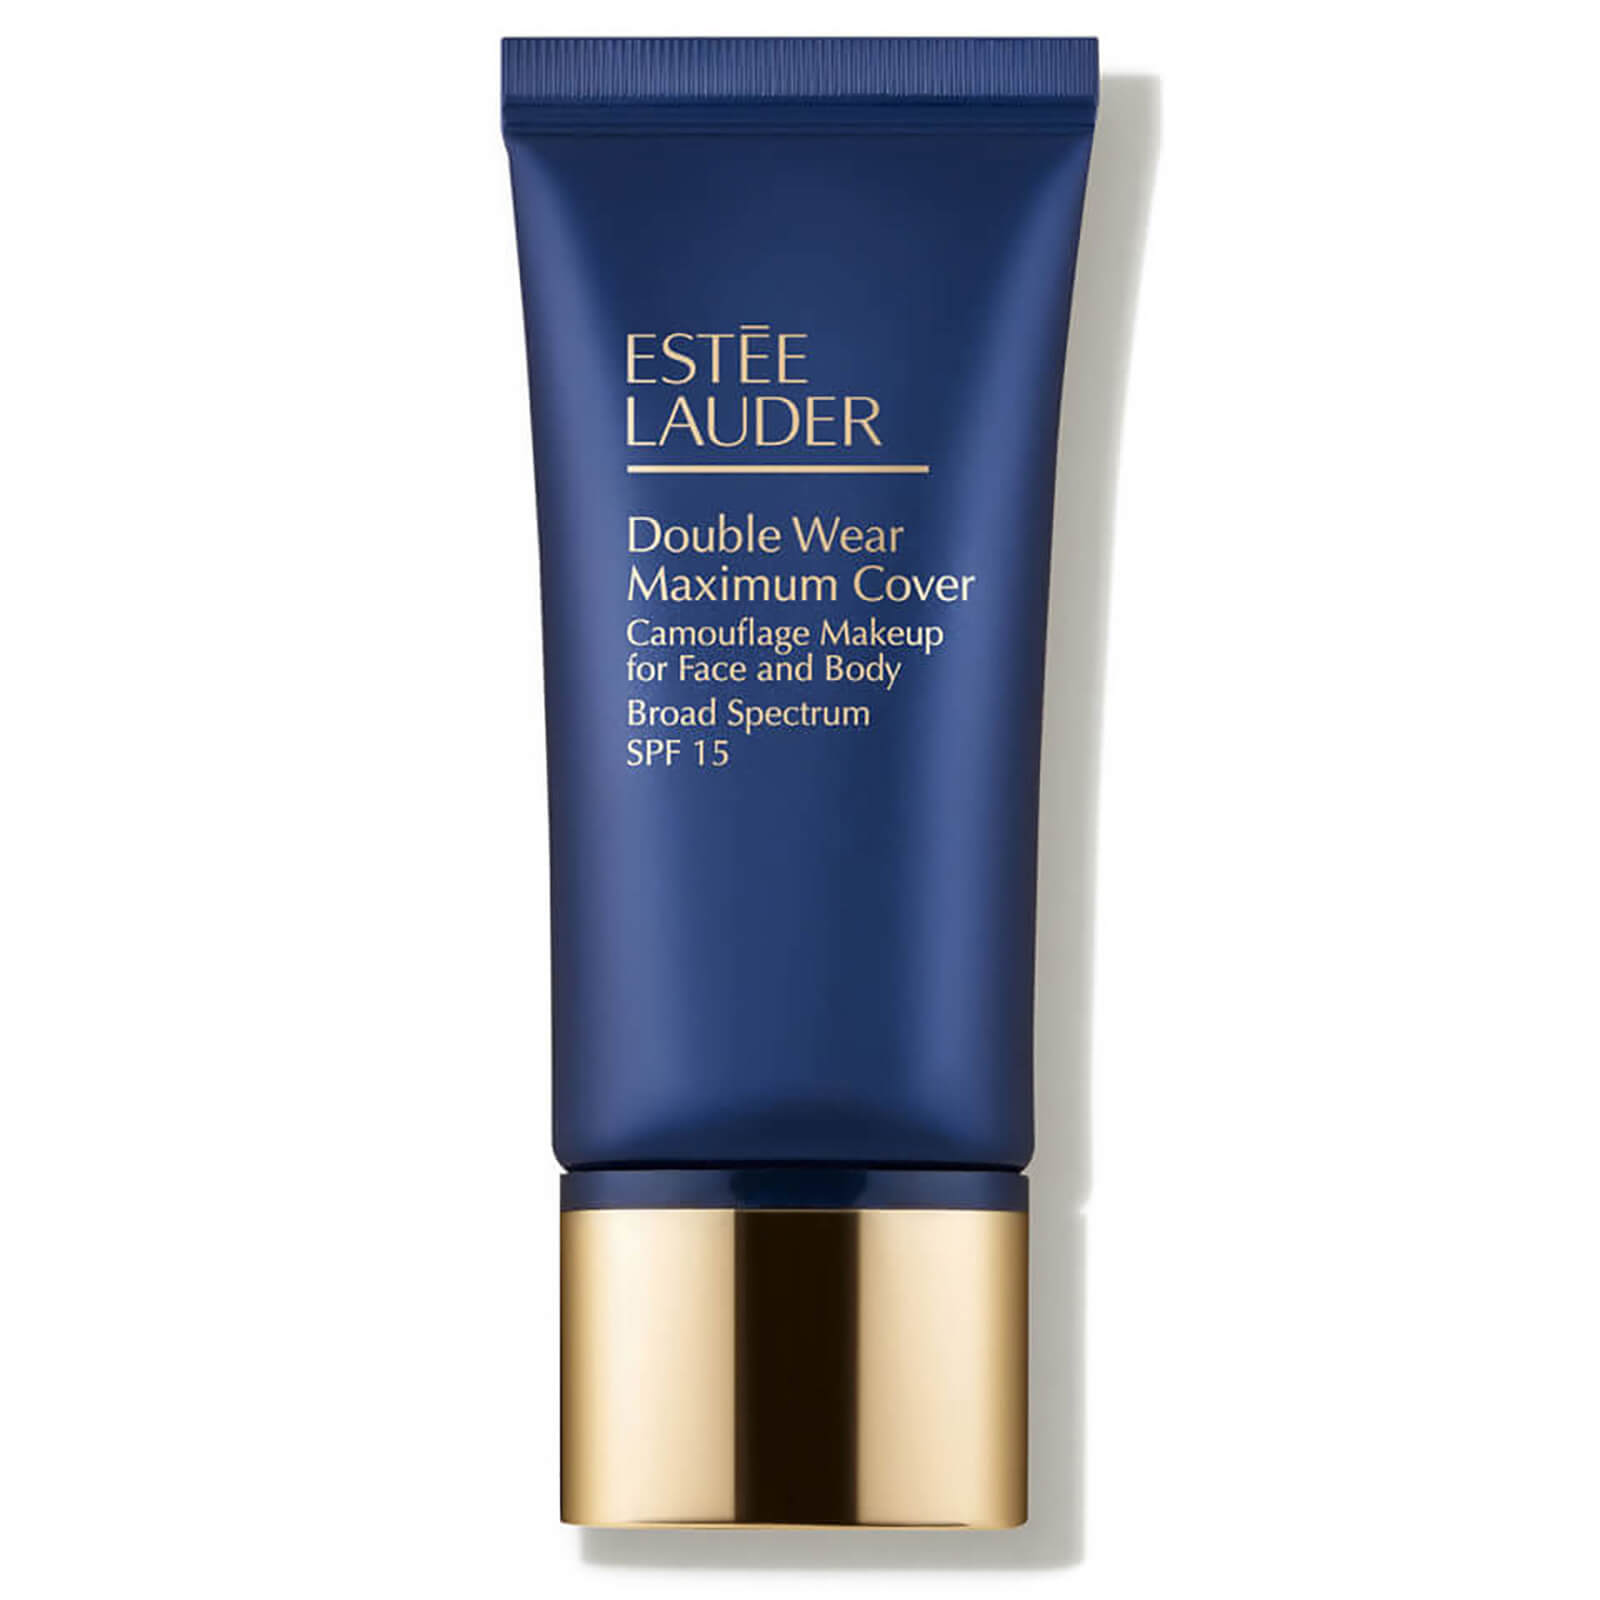 Estee Lauder Double Wear Maximum Cover Camouflage Makeup for Face and Body SPF15 30ml - 2W2 Rattan